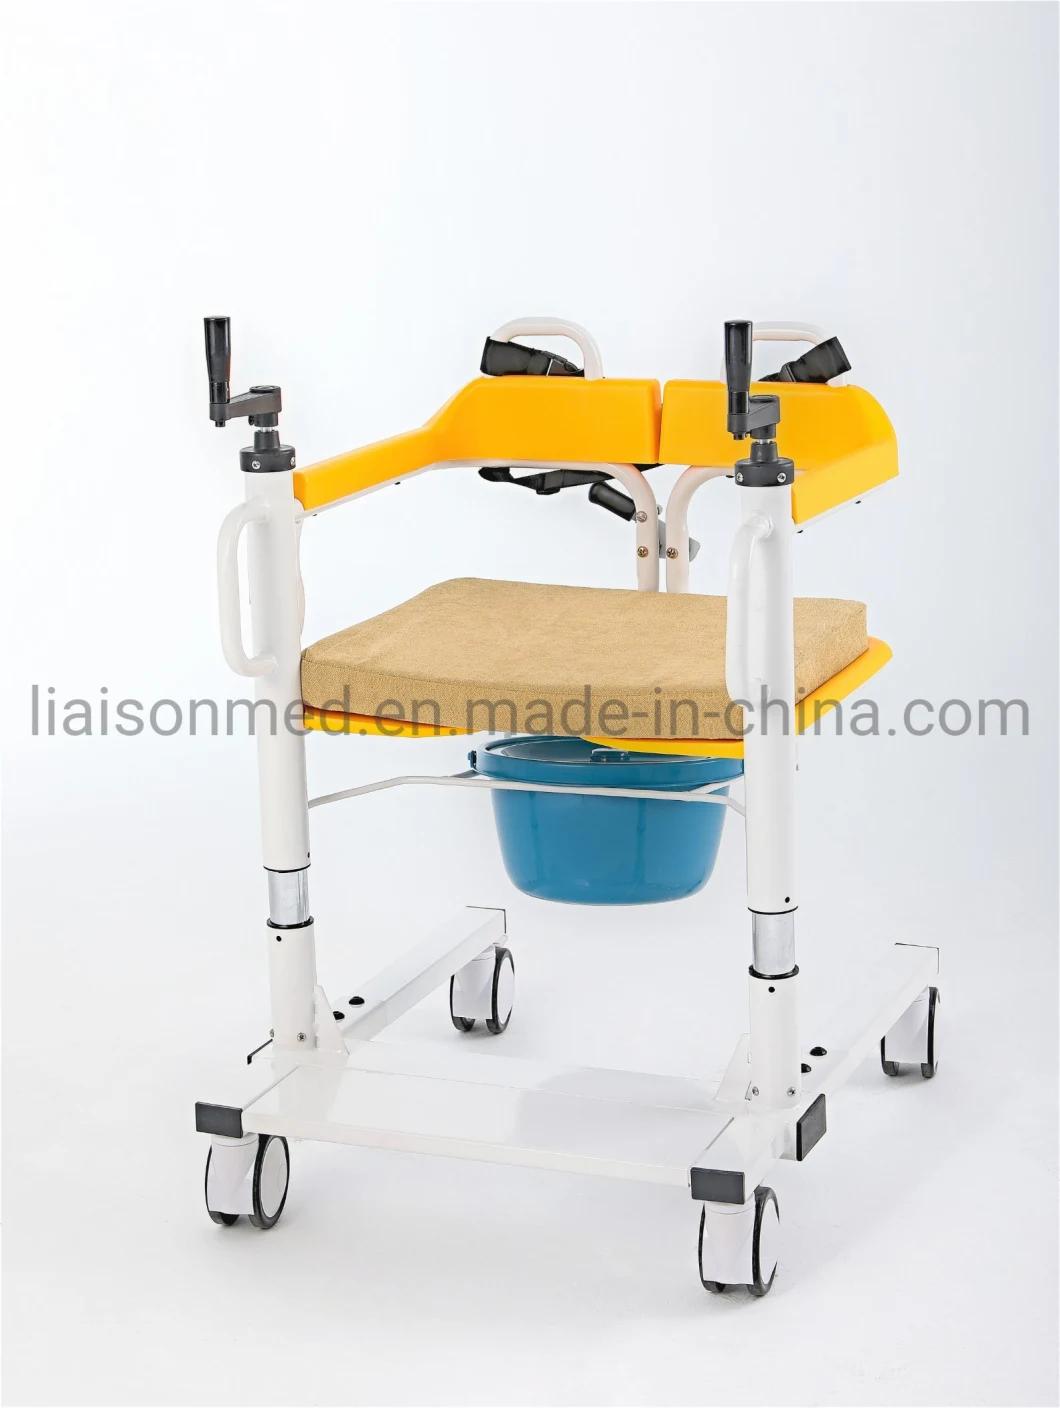 Mn-Ywj001 Disabled Patient Lifting Nursing Manual Patient Transfer Lift Chair with Wheel